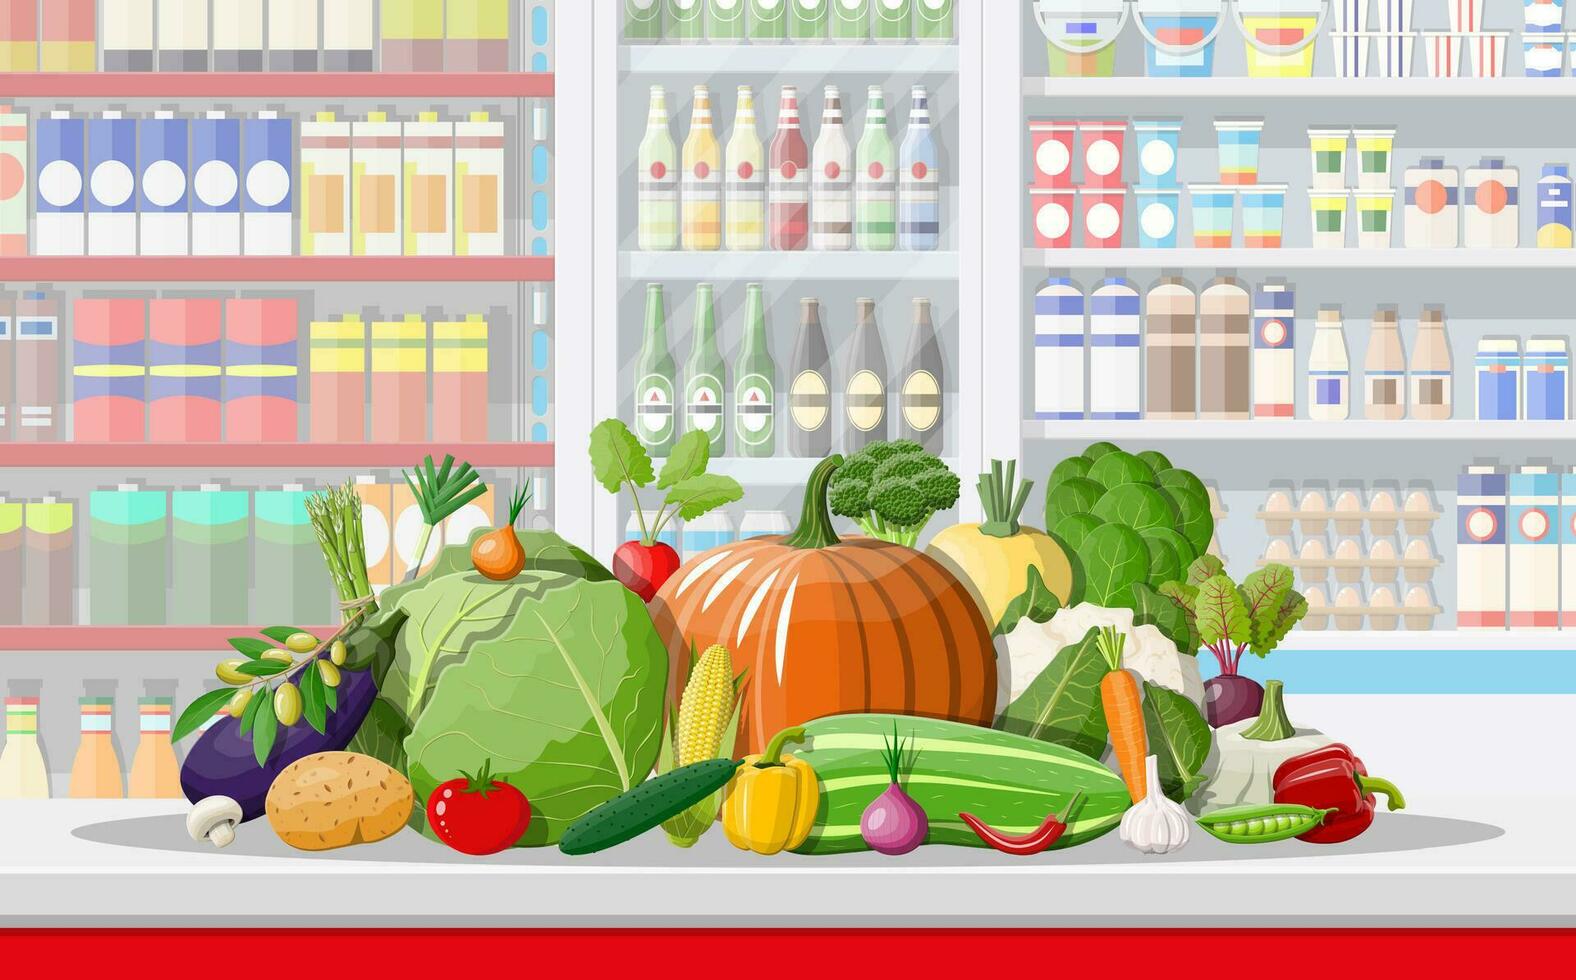 Supermarket store interior with vegetables. Big shopping mall. Interior store inside. Checkout counter, grocery, drinks, food, dairy products. Vector illustration in flat style